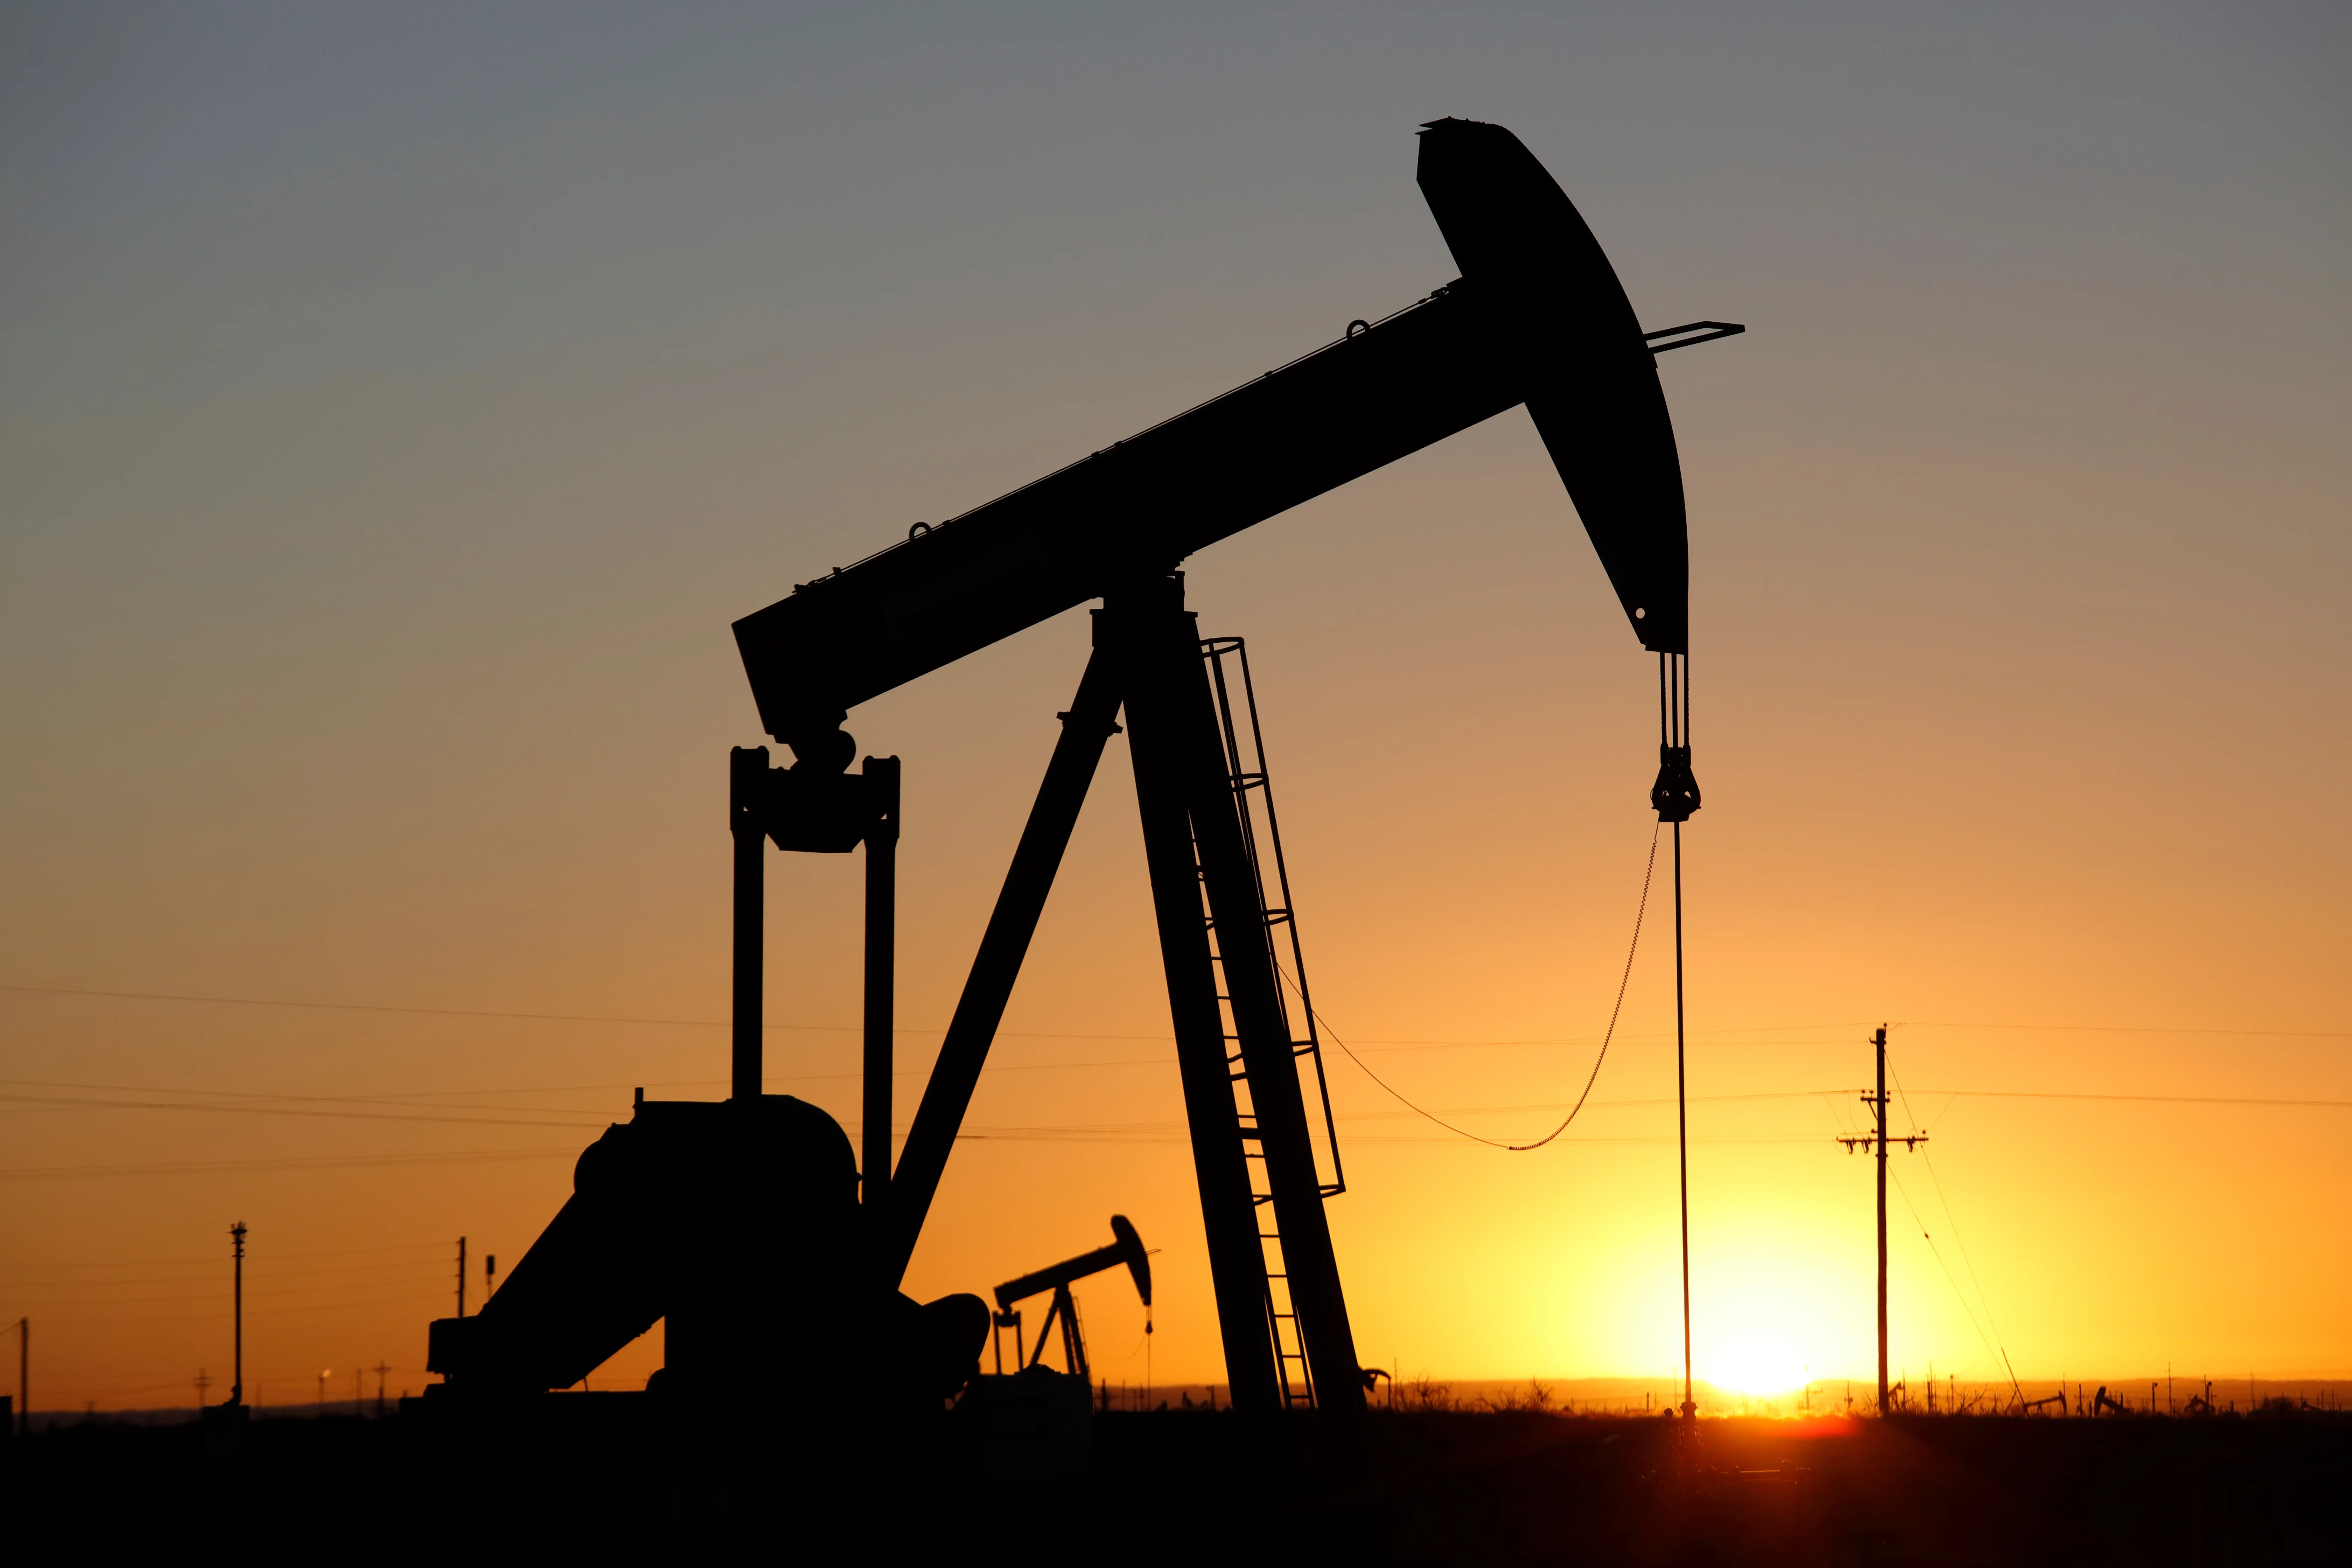 The silhouette of a mineral resources pumpjack operating at sunset.